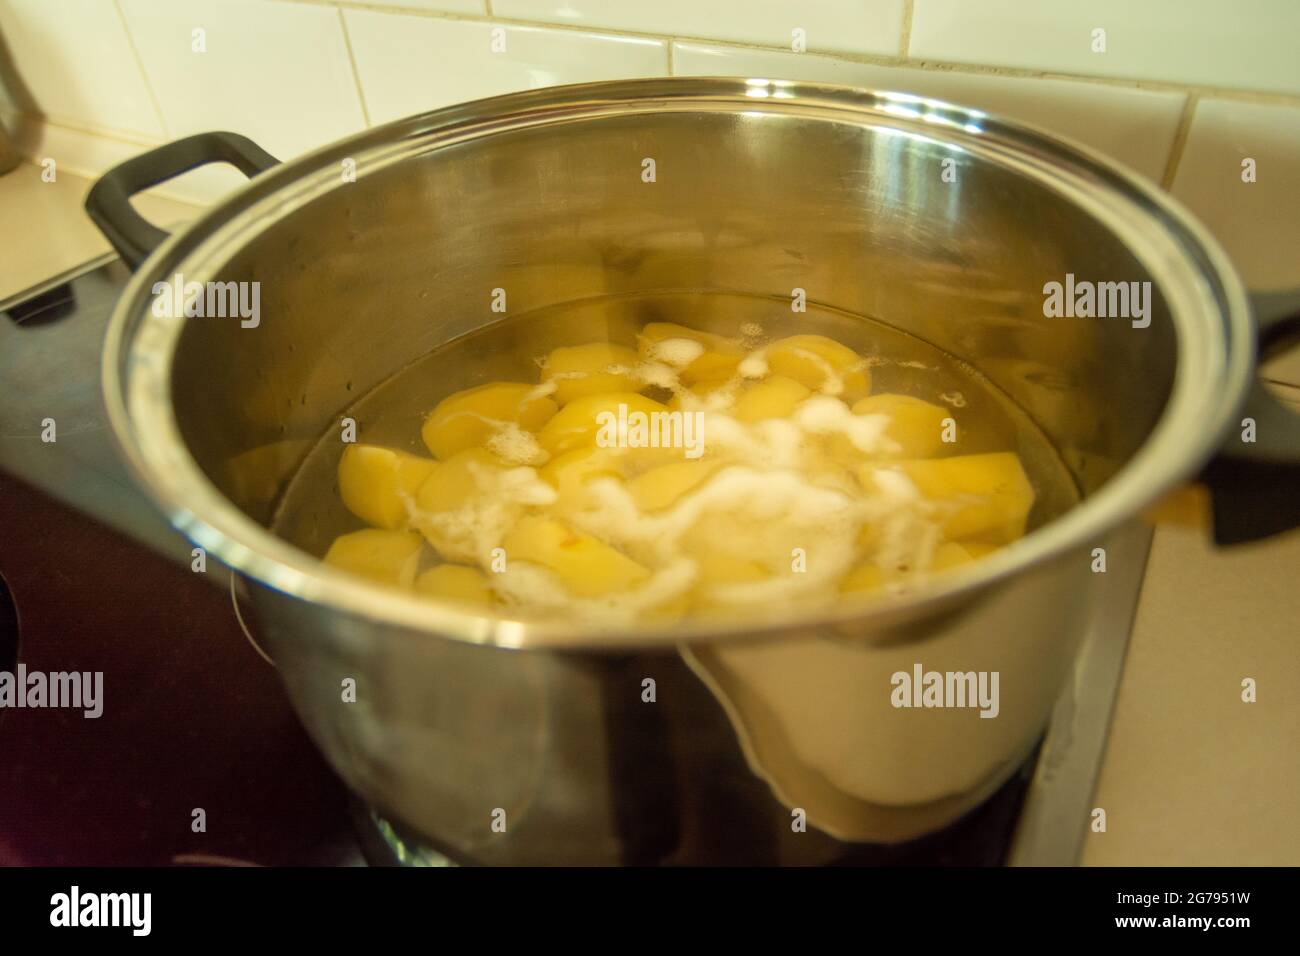 Cooking a peeled potato in water in a silver big pot Stock Photo